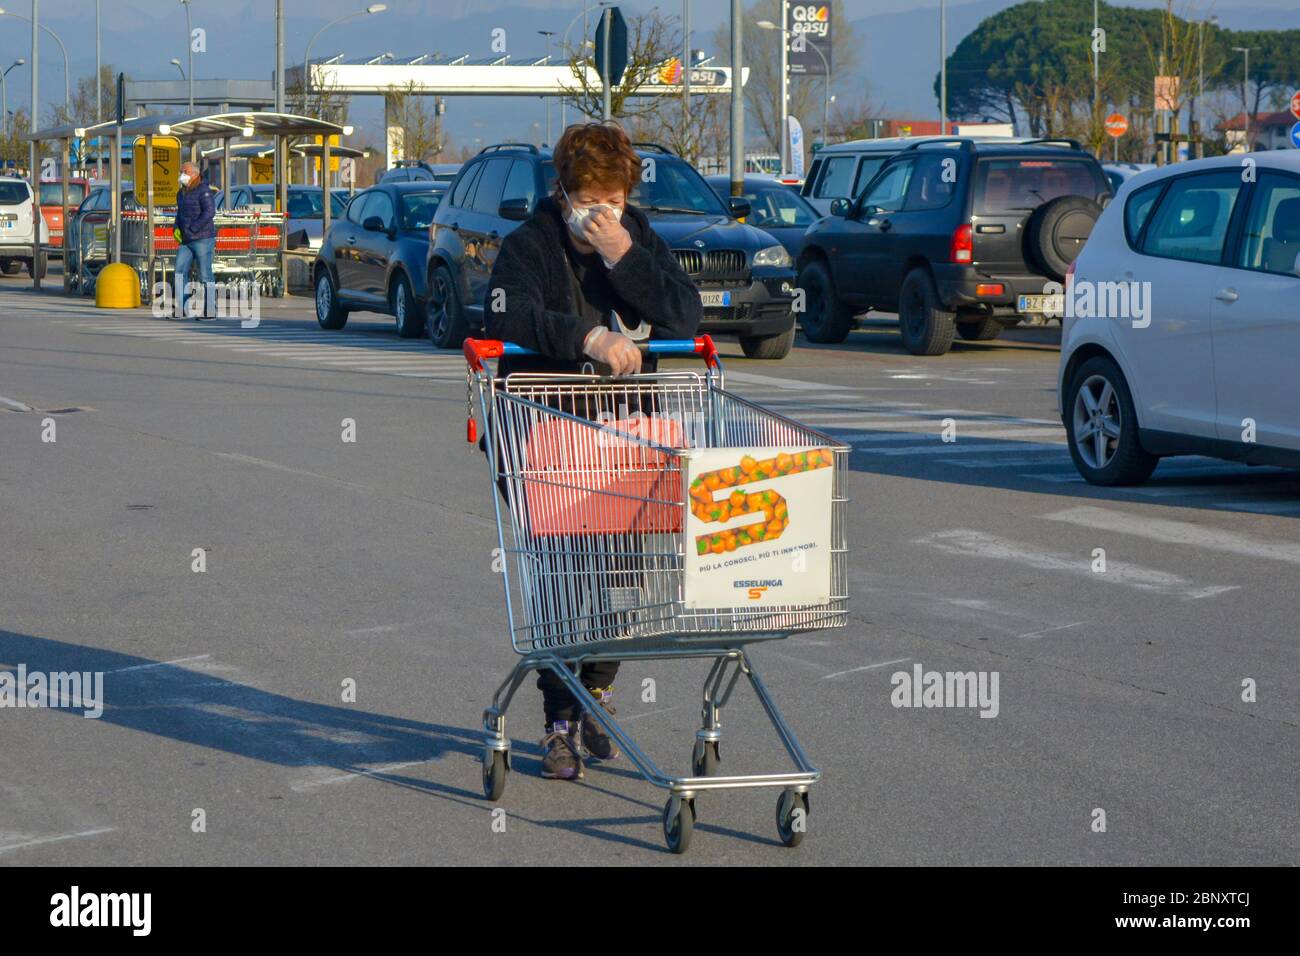 Tuscany, Italy 03/21/20: Routine daily scene during coronavirus national lockdown: a woman with COVID-19 protective mask pushing shopping cart crying Stock Photo